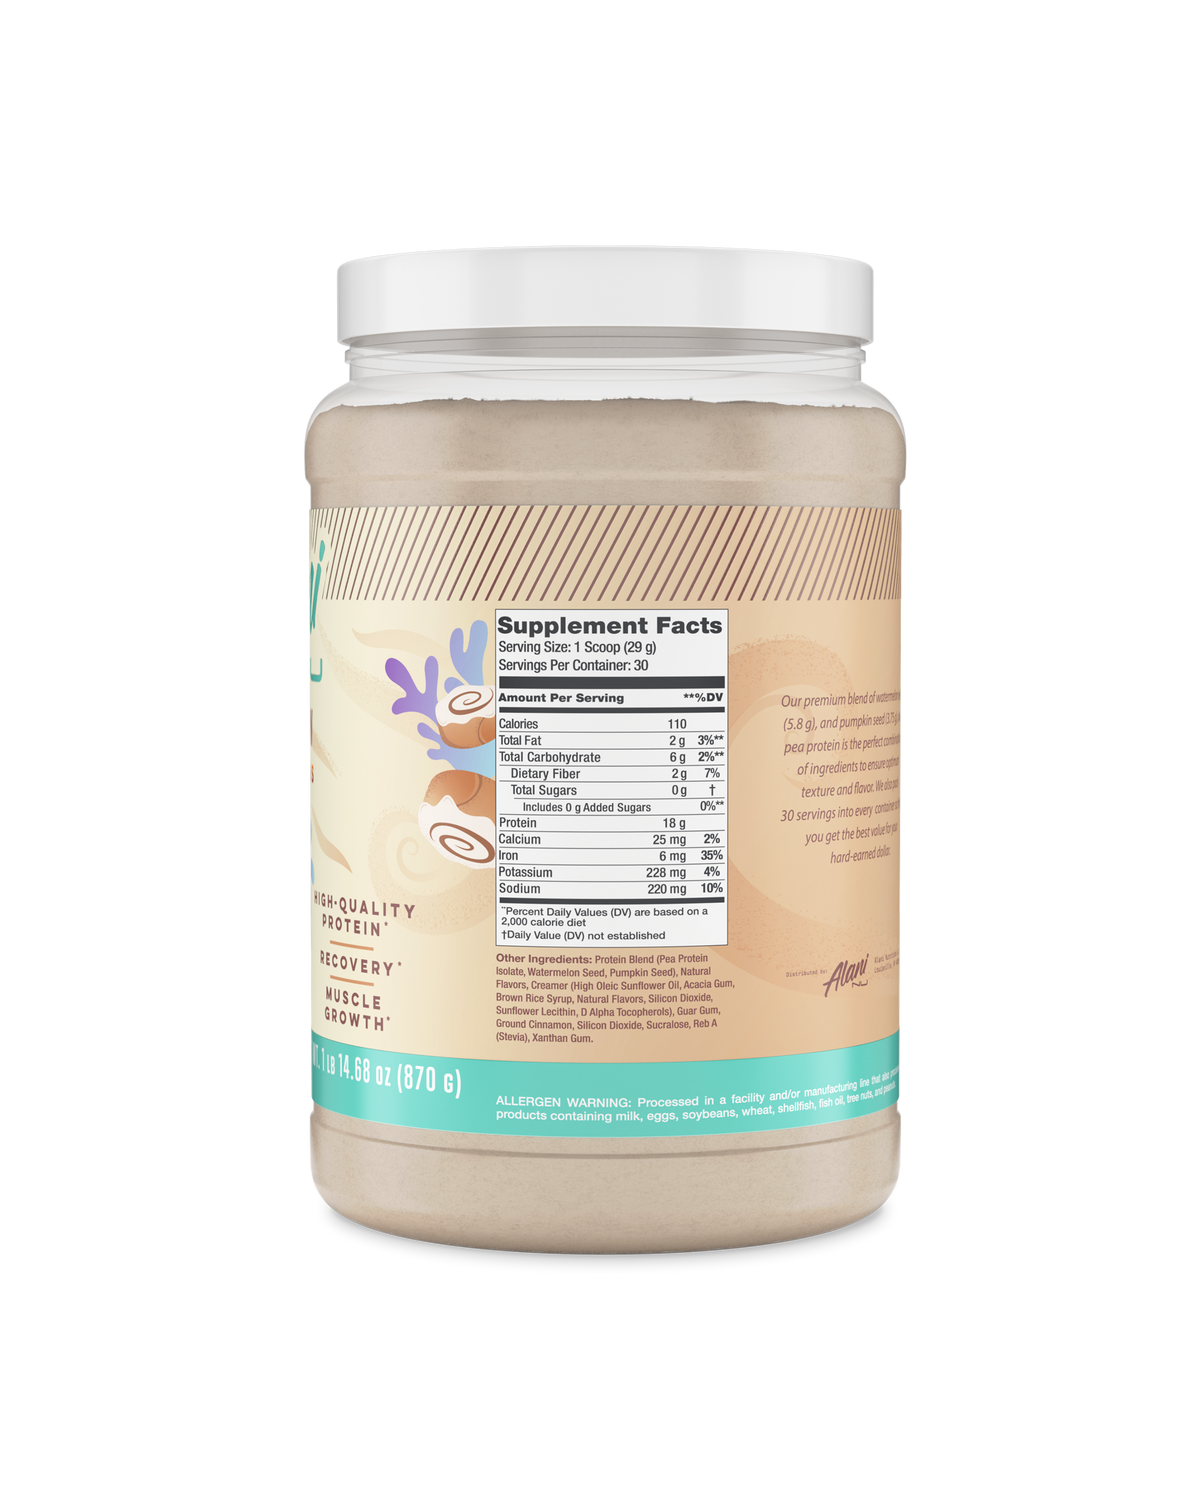 A back view of plant protein in Cinni Buns flavor showcasing supplement facts.